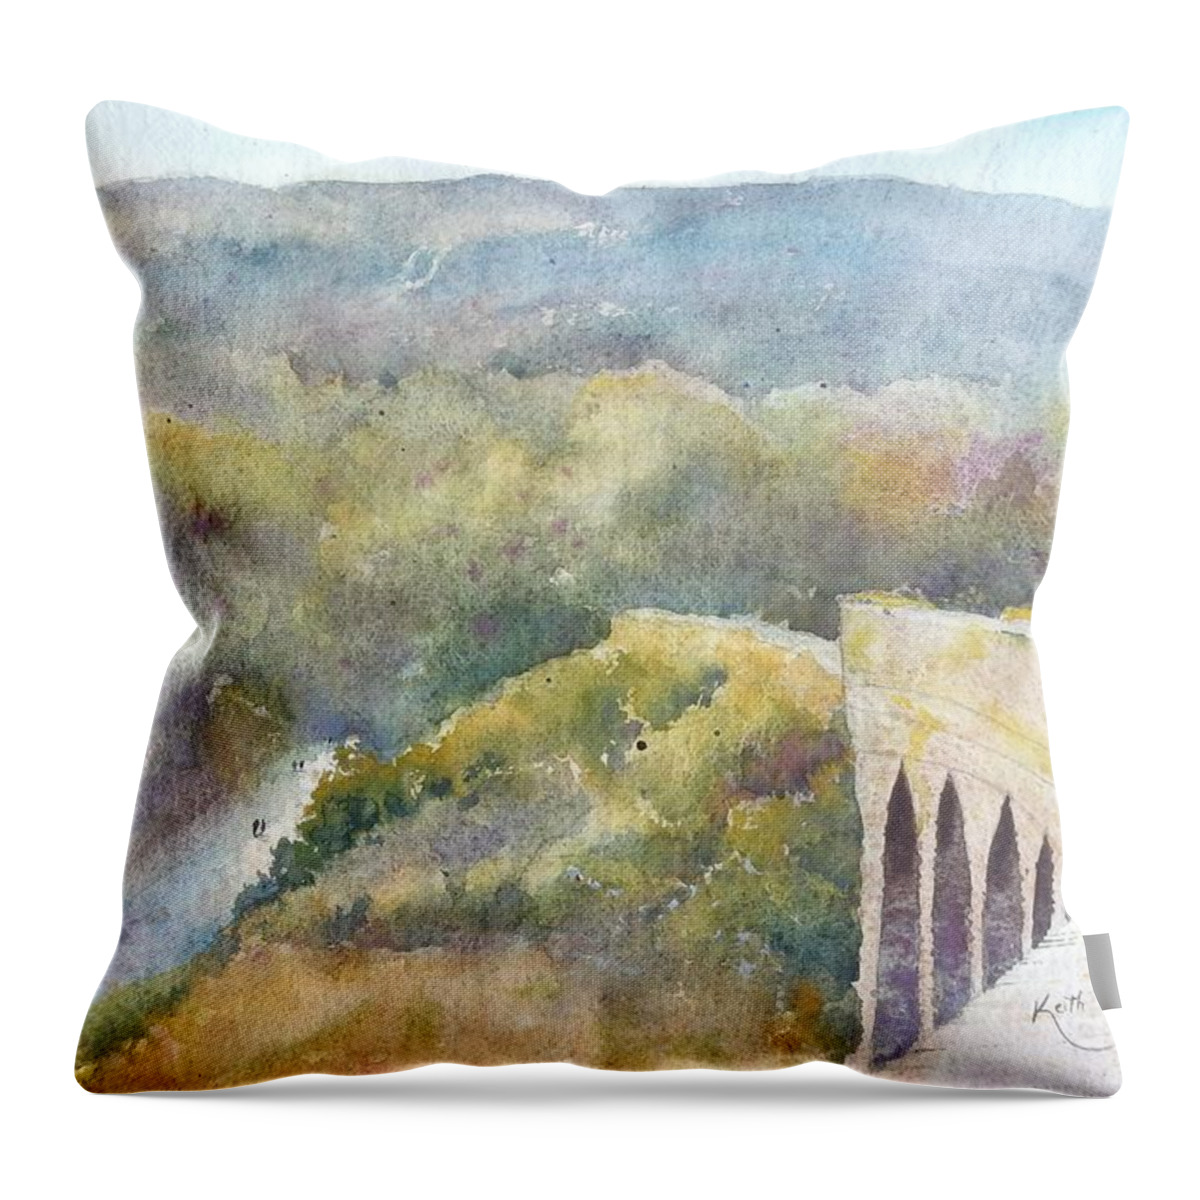 Waterford Greenway Throw Pillow featuring the painting Kilmacthomas Viaduct, Waterford Greenway by Keith Thompson